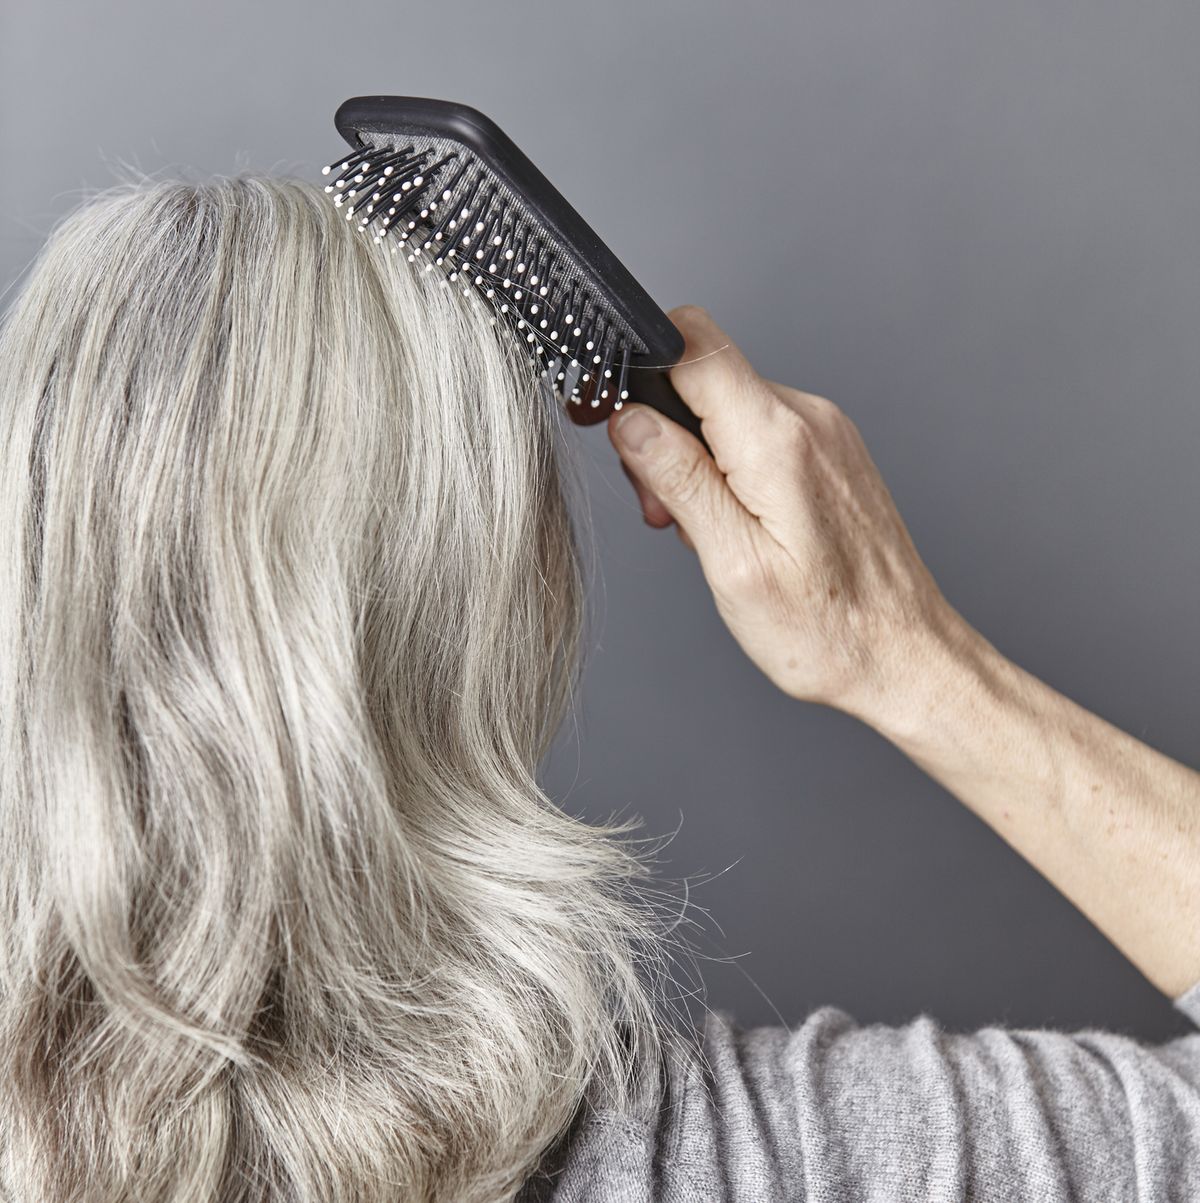 Thinning hair: Everything you need to know about losing your hair